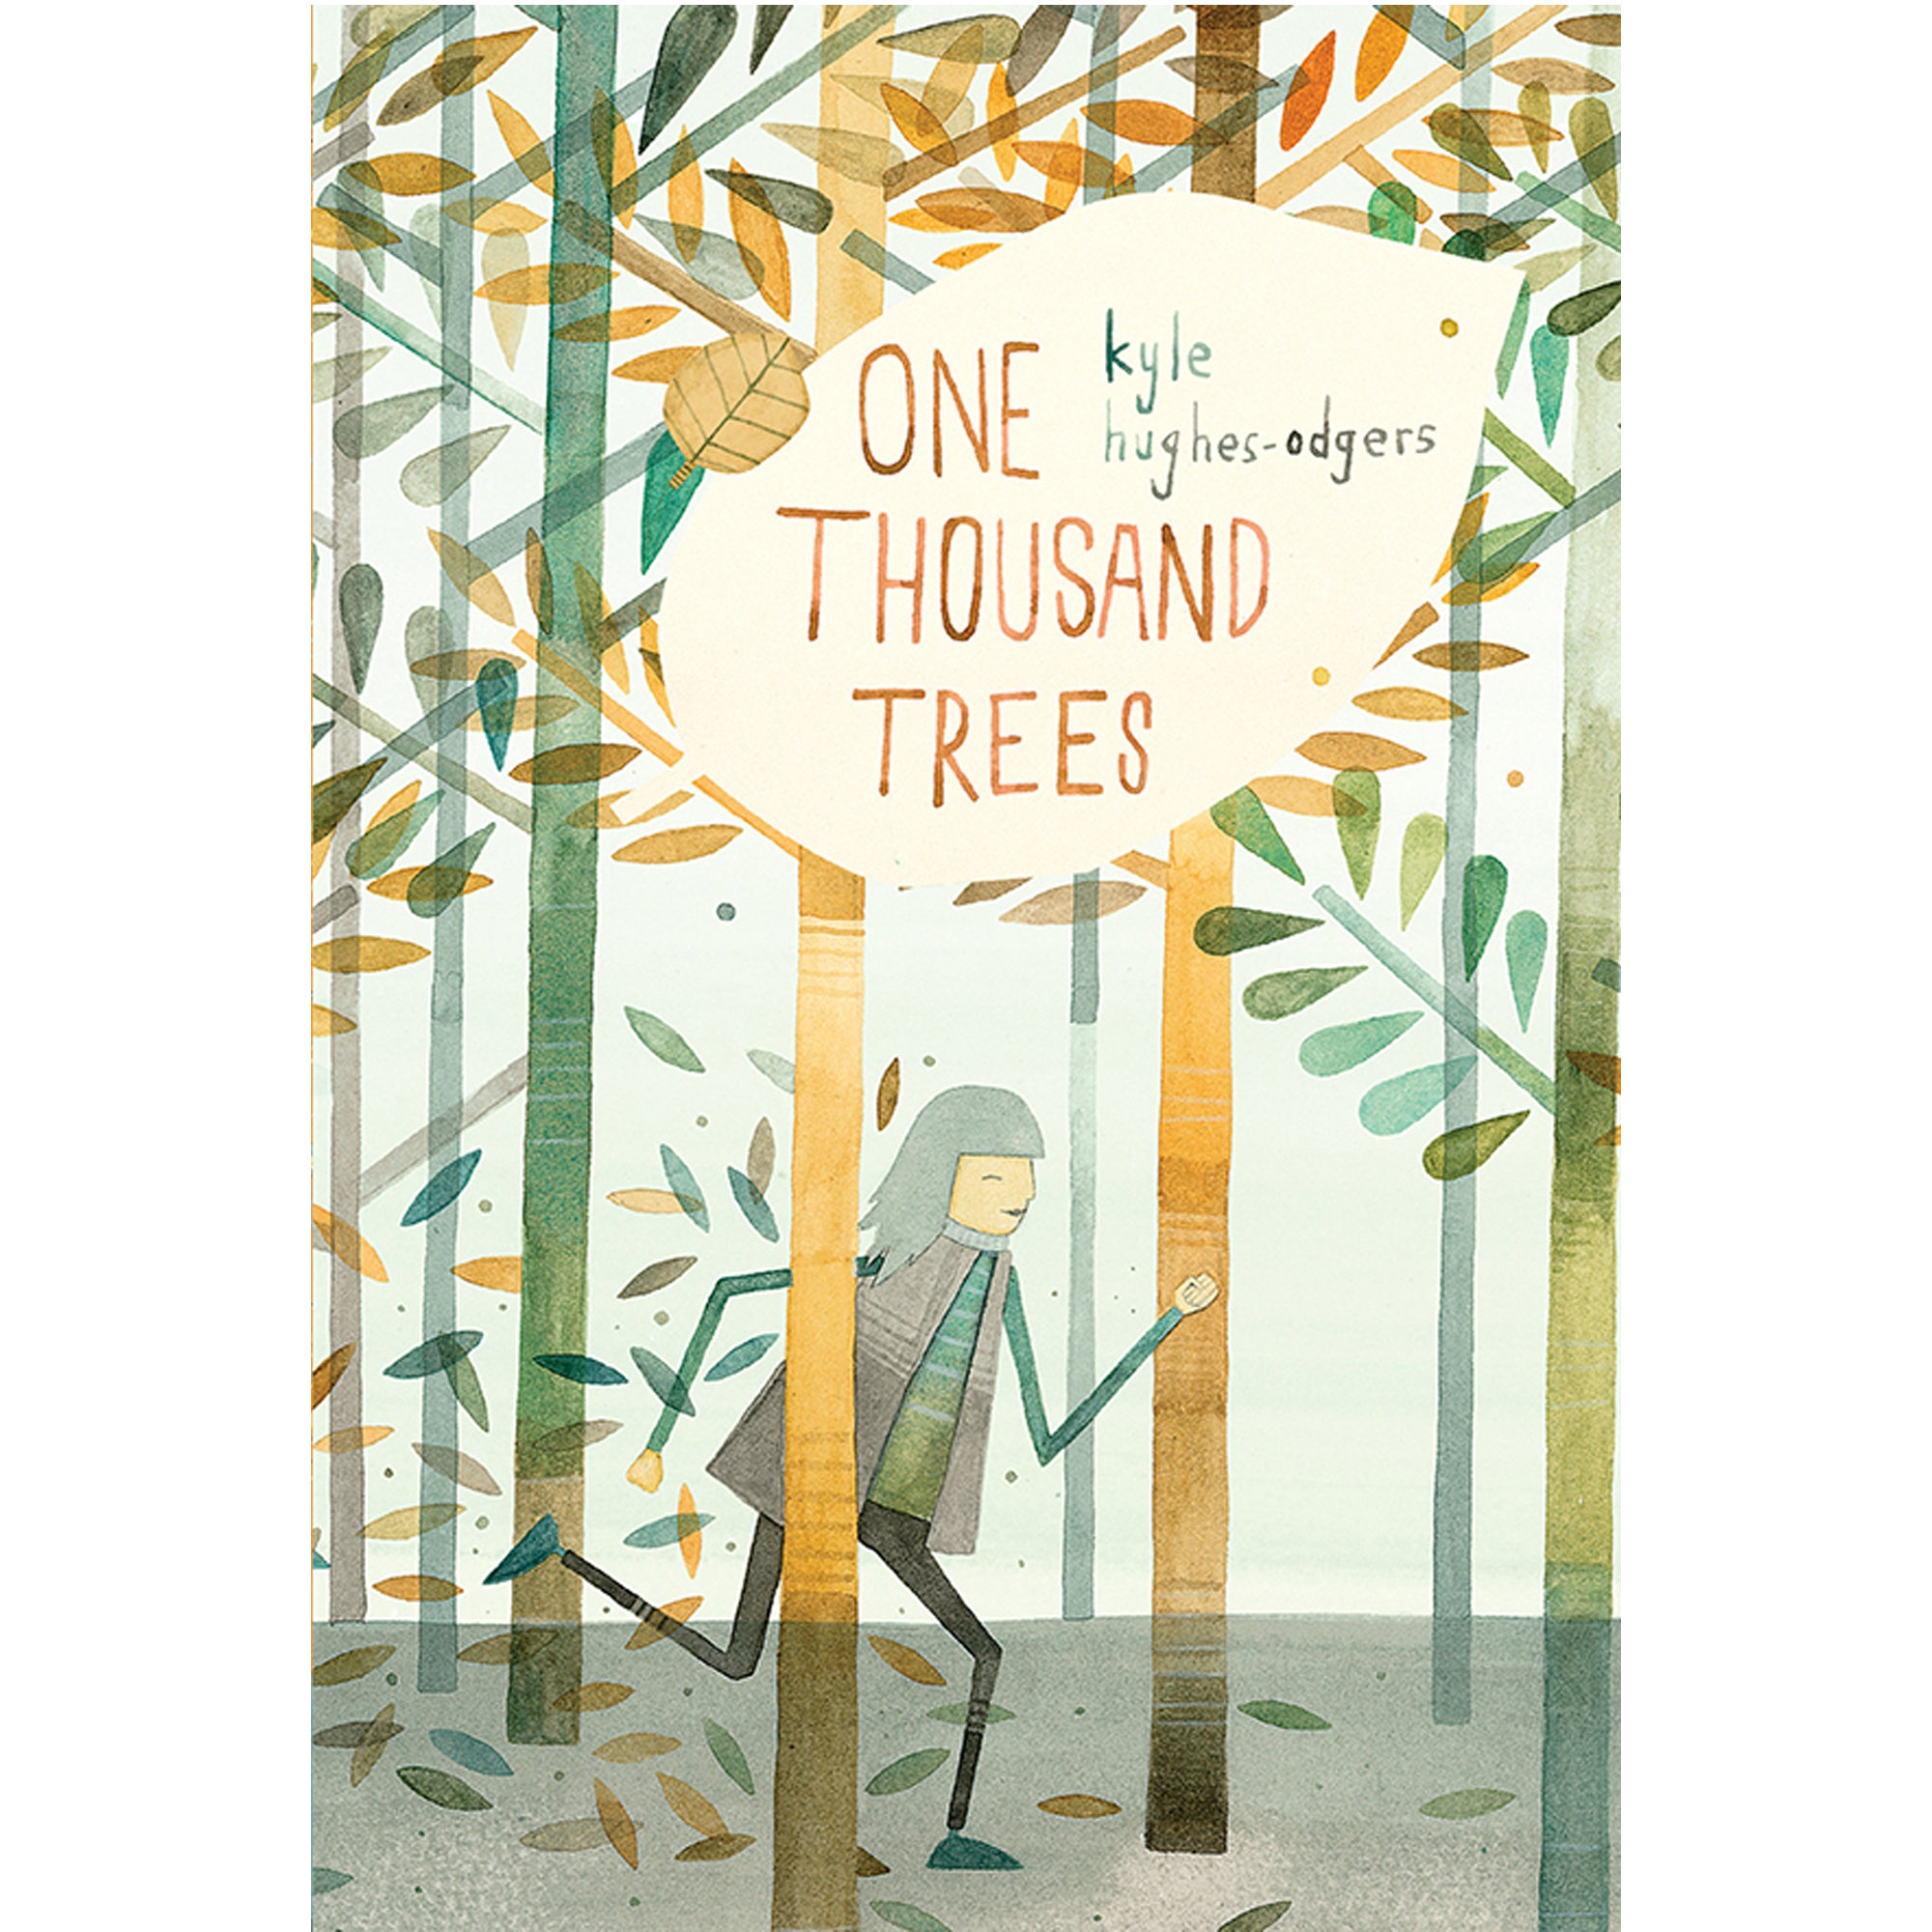 Kyle Hughes- Odgers - "One Thousand Trees" Softcover Childrens Book (m/fac10)